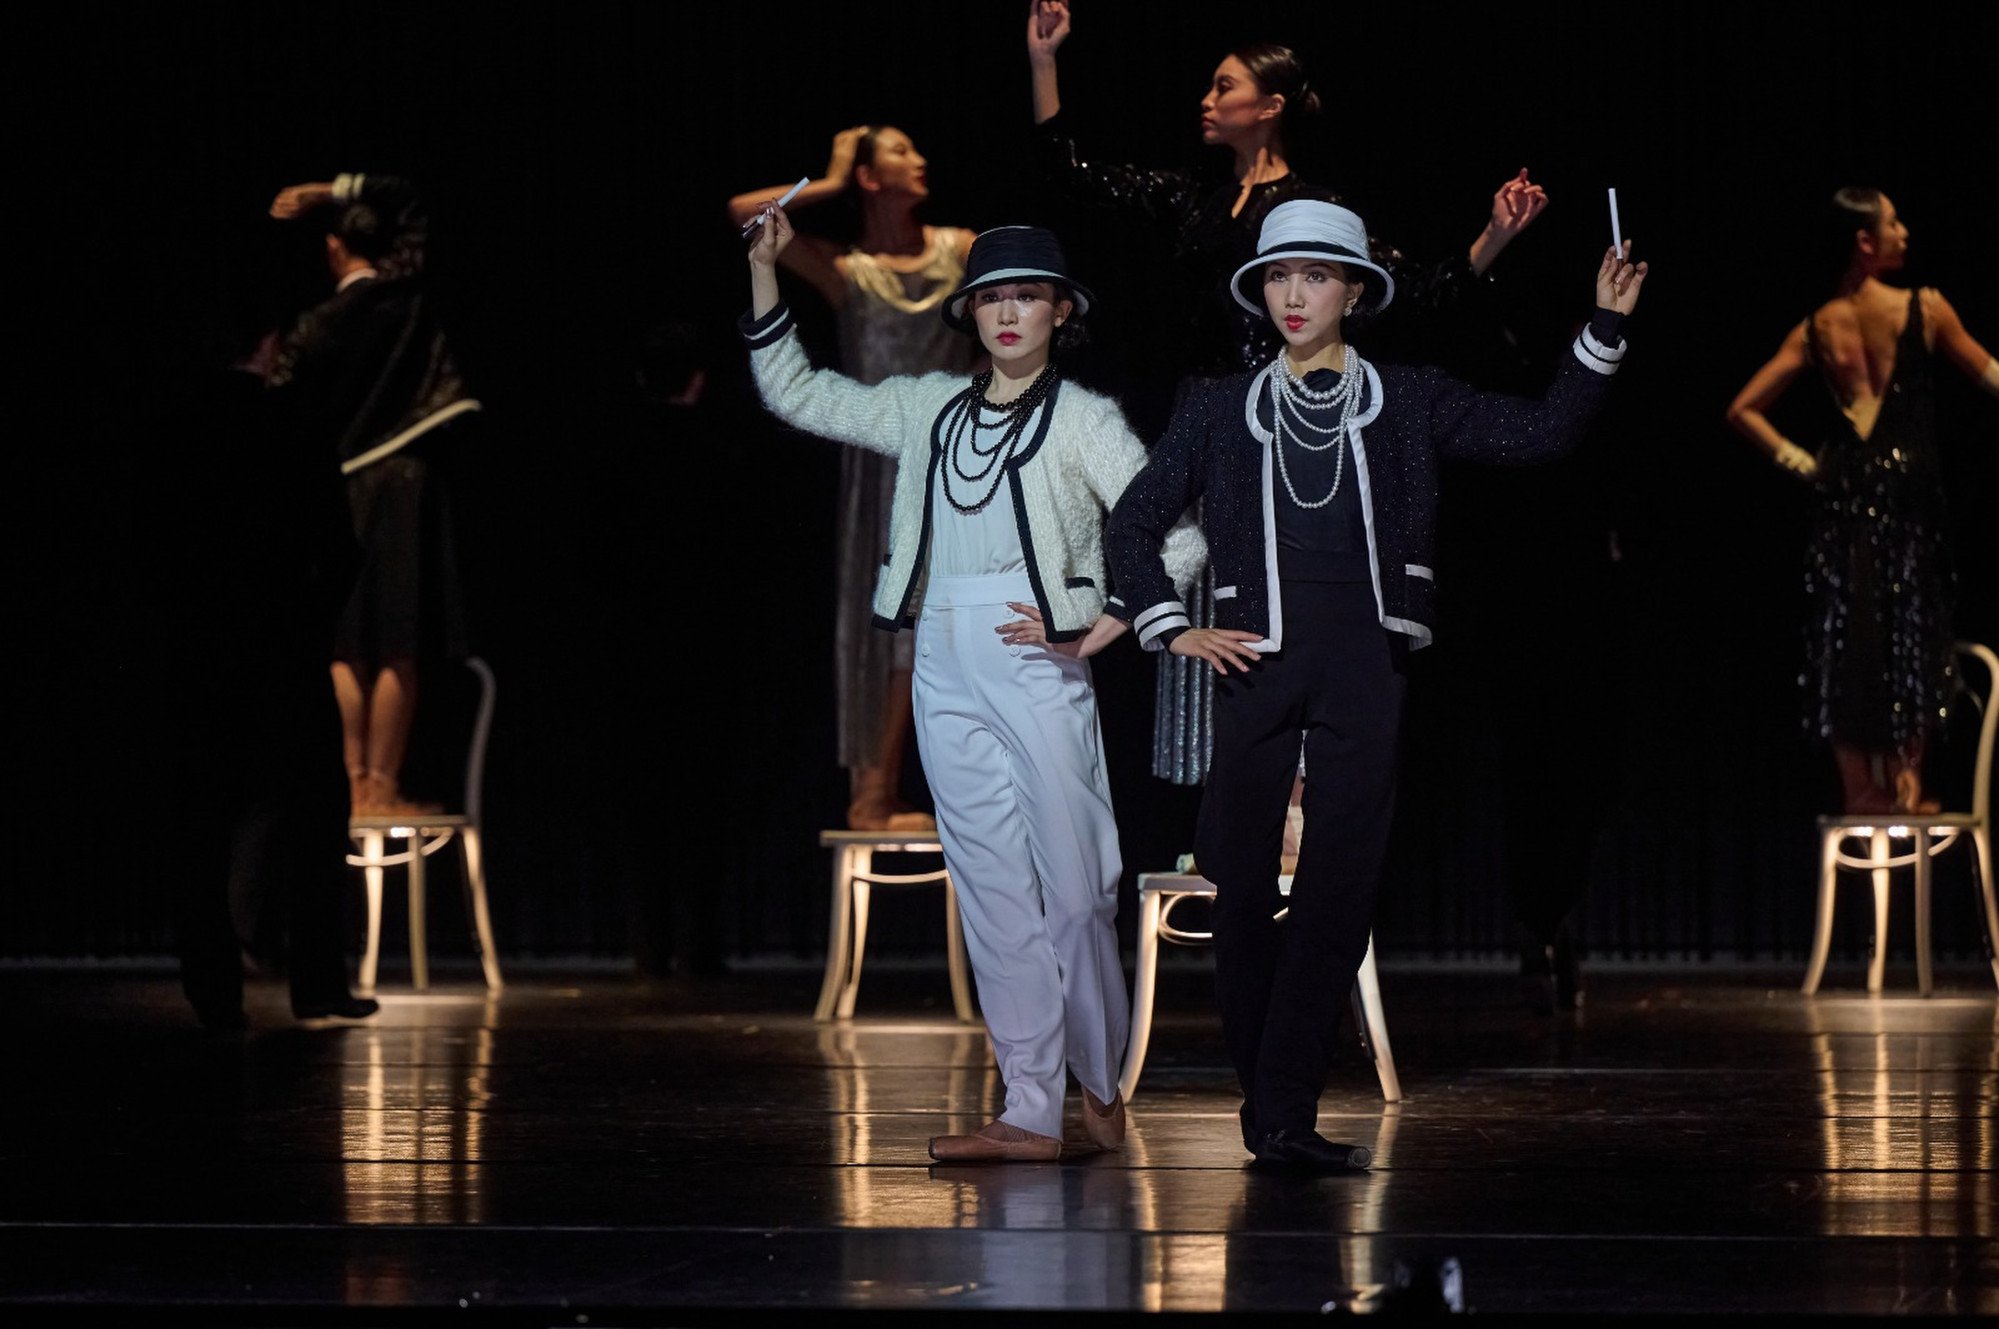 Hong Kong Ballet's Coco Chanel: the Life of a Fashion Icon disappoints  despite beautiful visuals